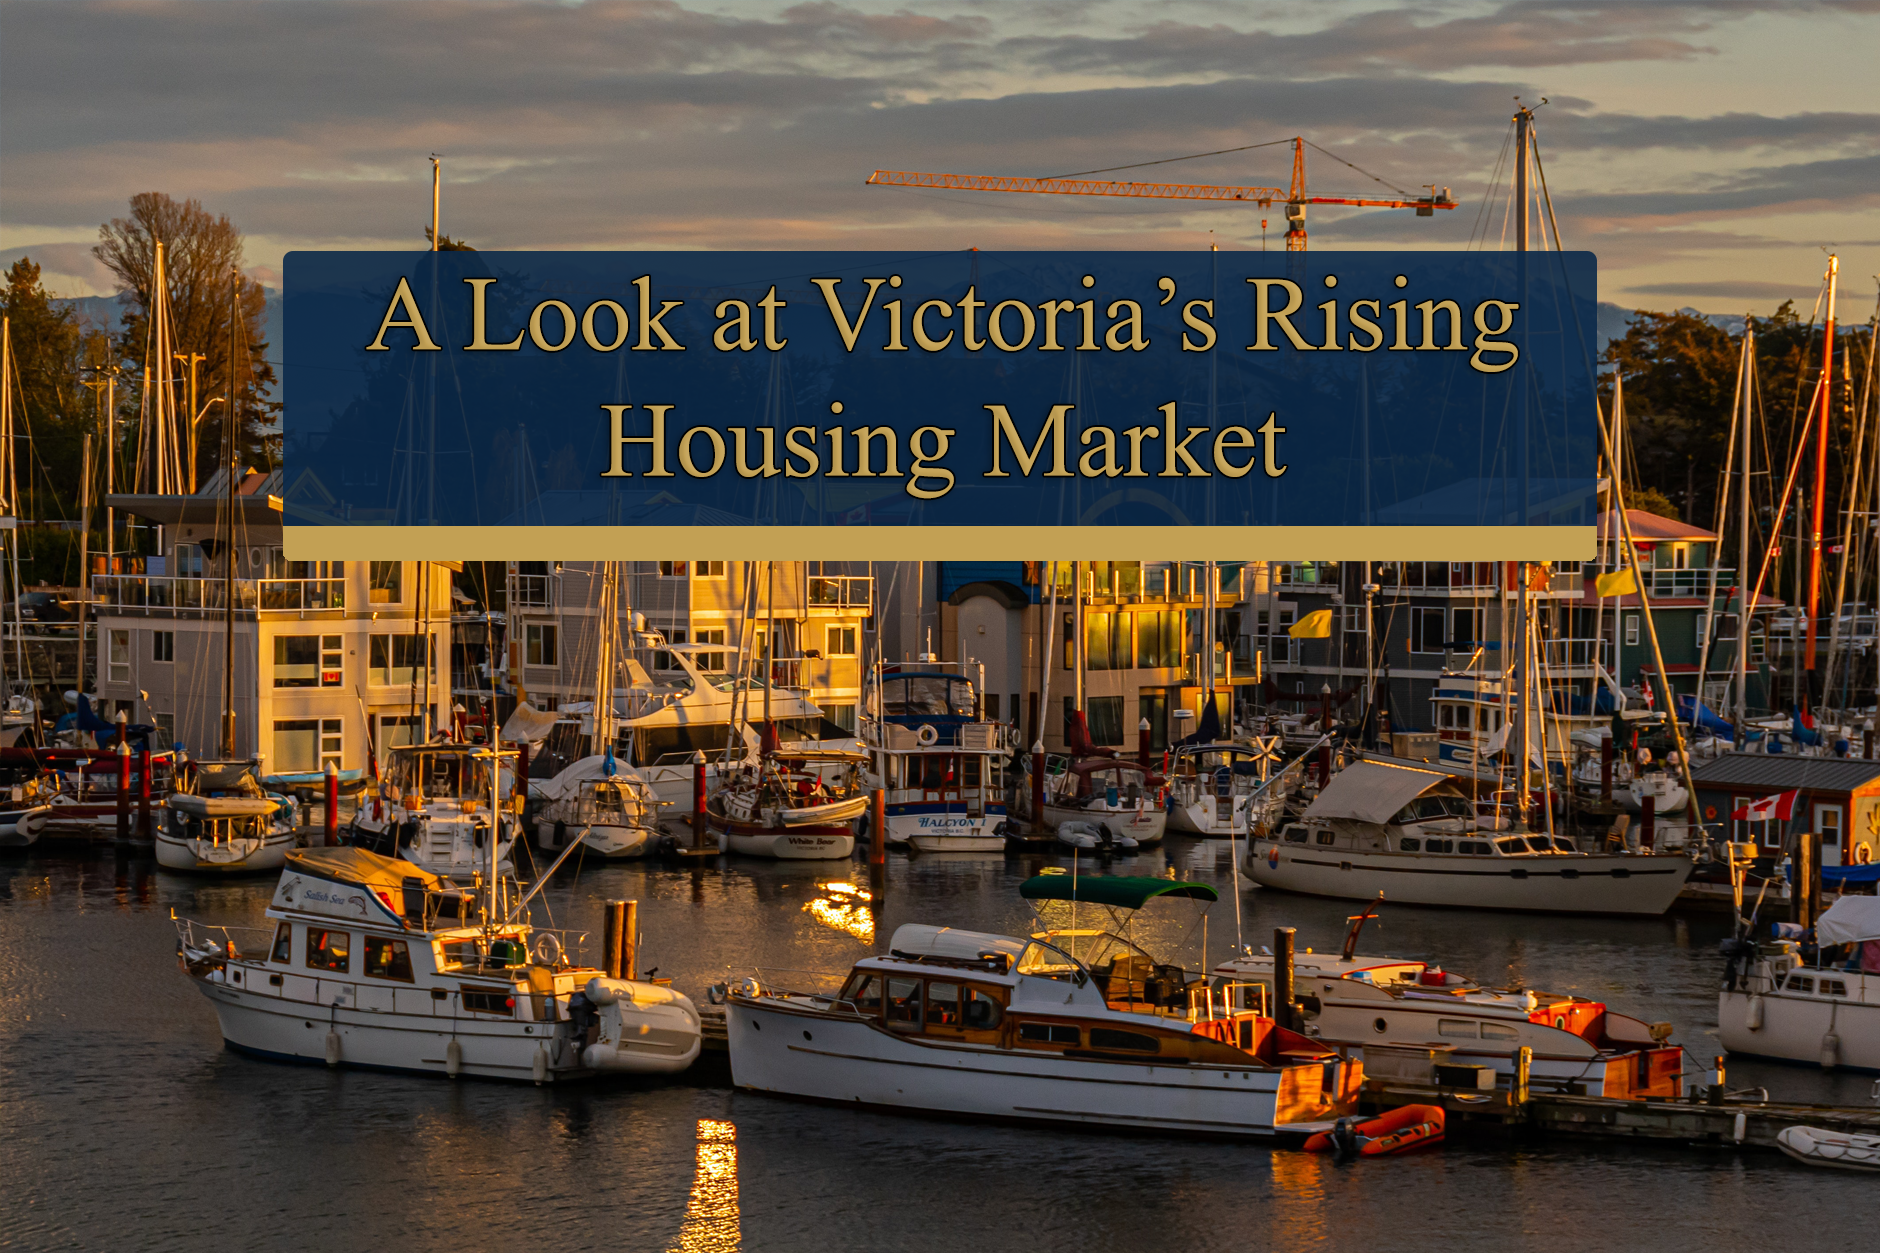 A Look at Victoria's Rising Housing Market